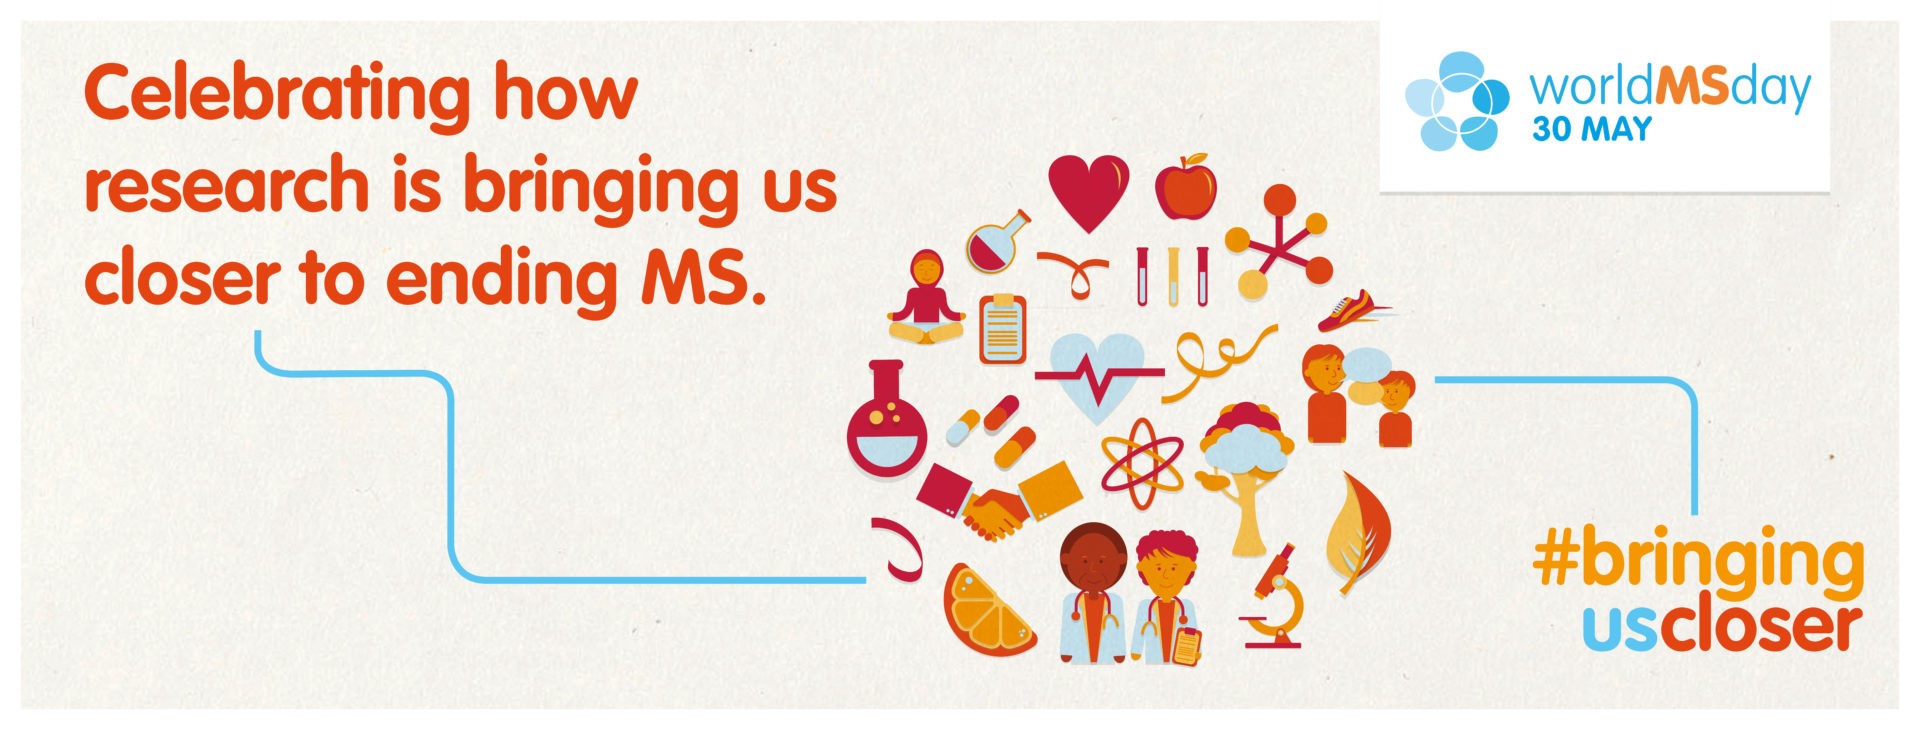 Celebrating howCelebrating how research is bringing us closer to ending MS research is bringing us closer to ending MS 